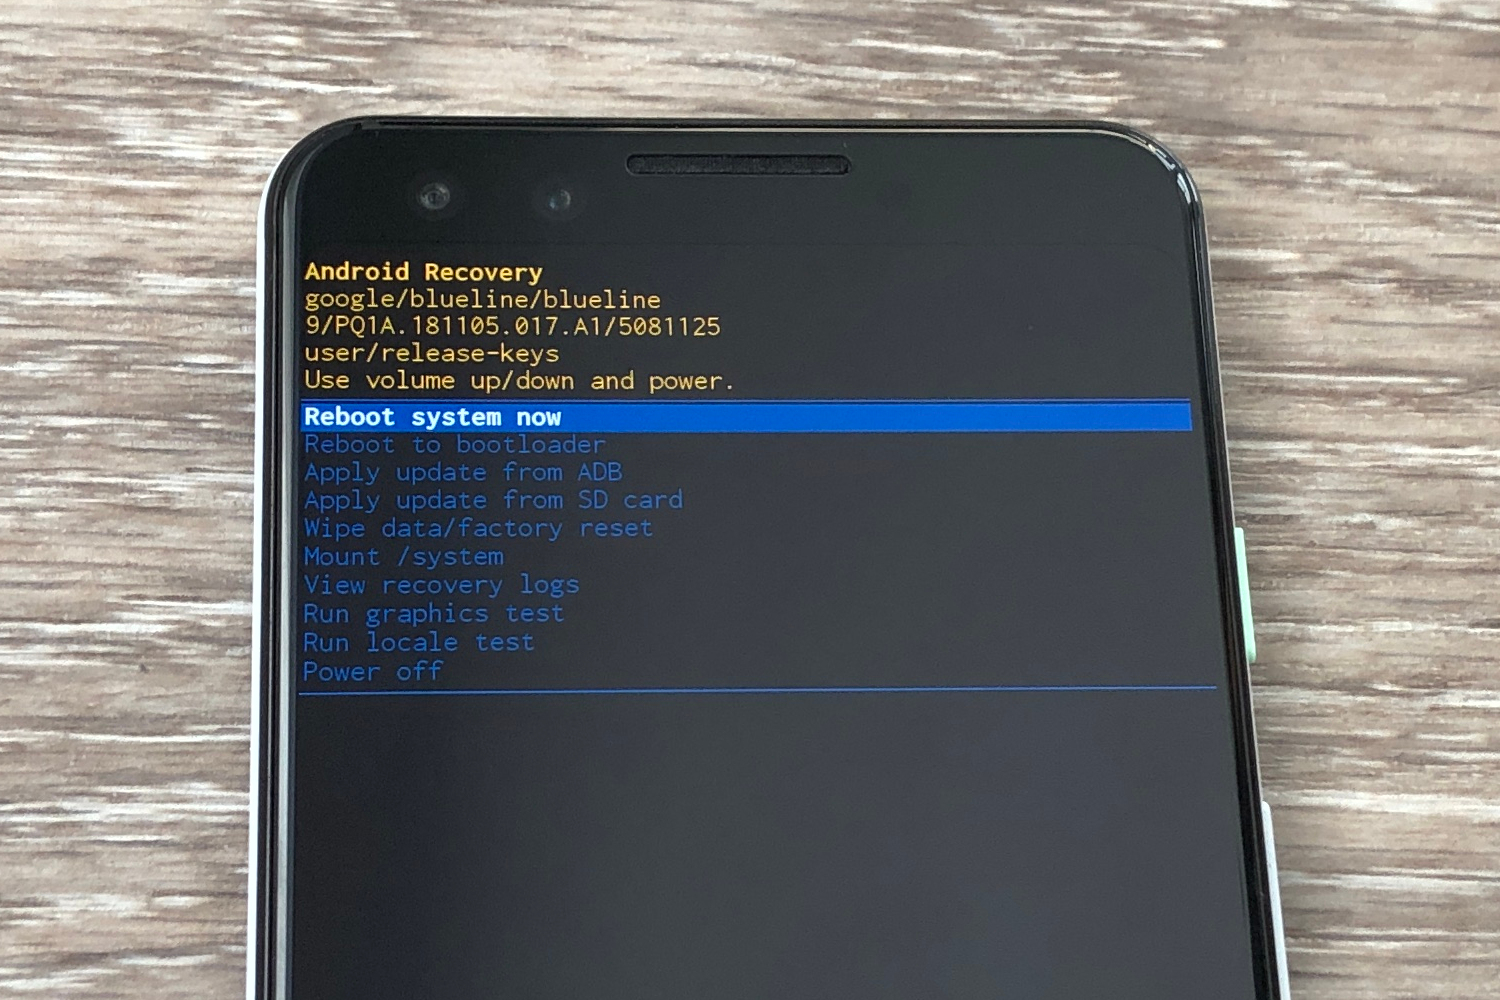 How to use Android Recovery Mode to Fix Your Phone or Tablet